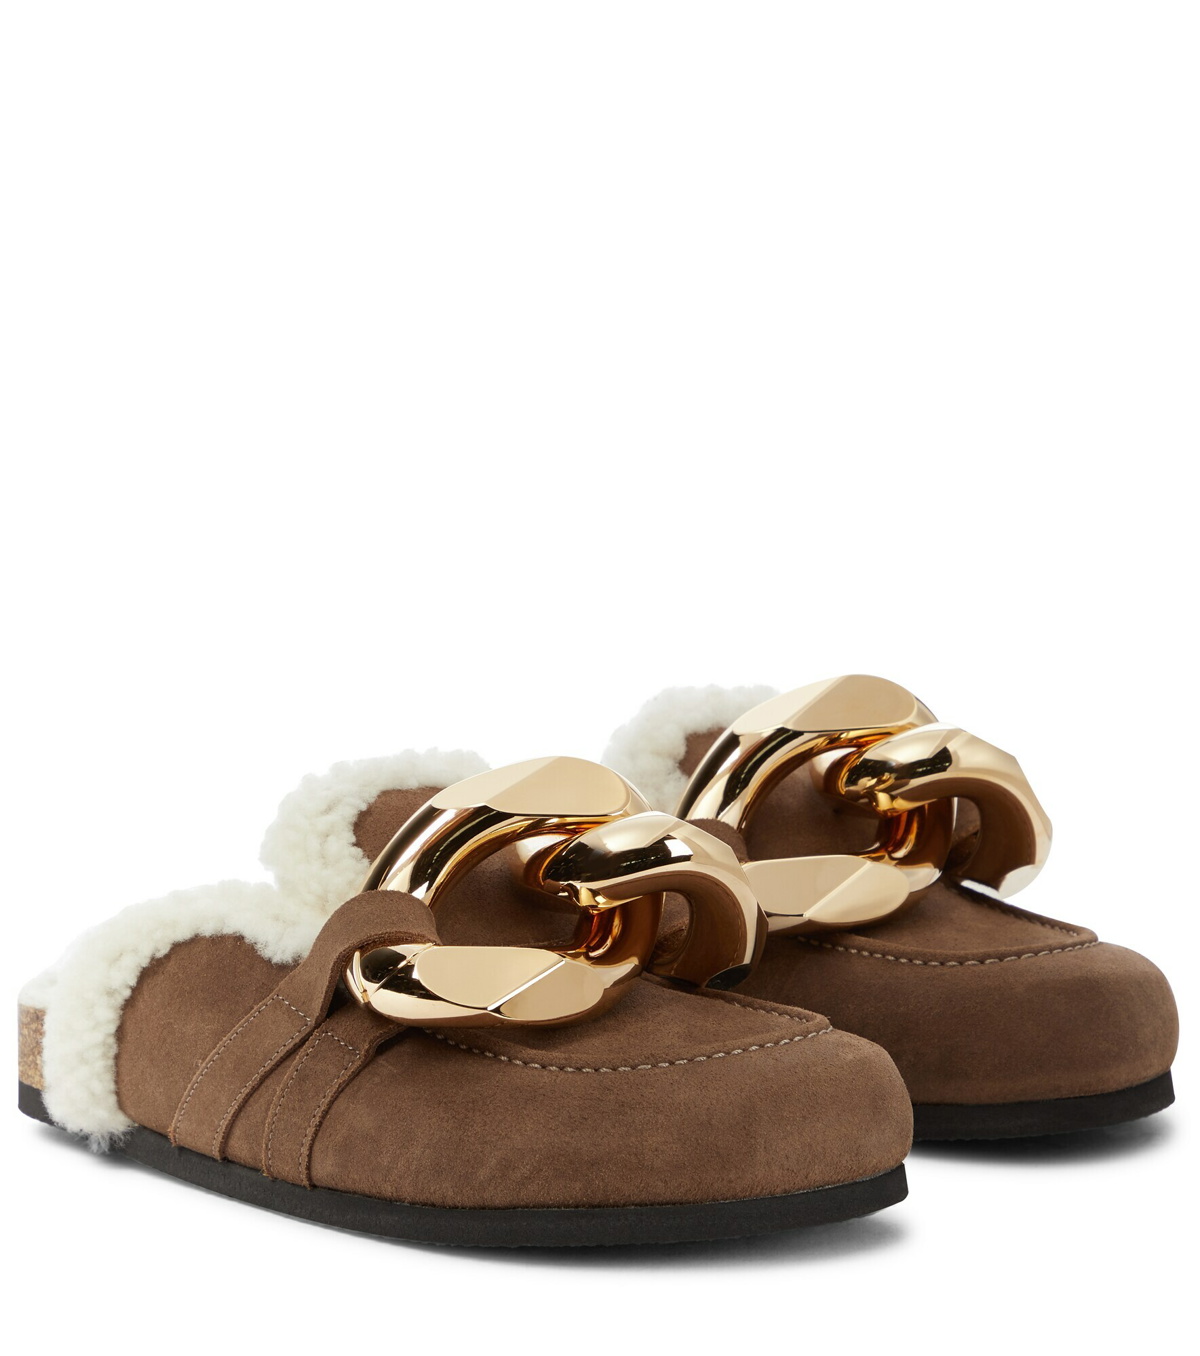 JW Anderson - Embellished suede slippers JW Anderson